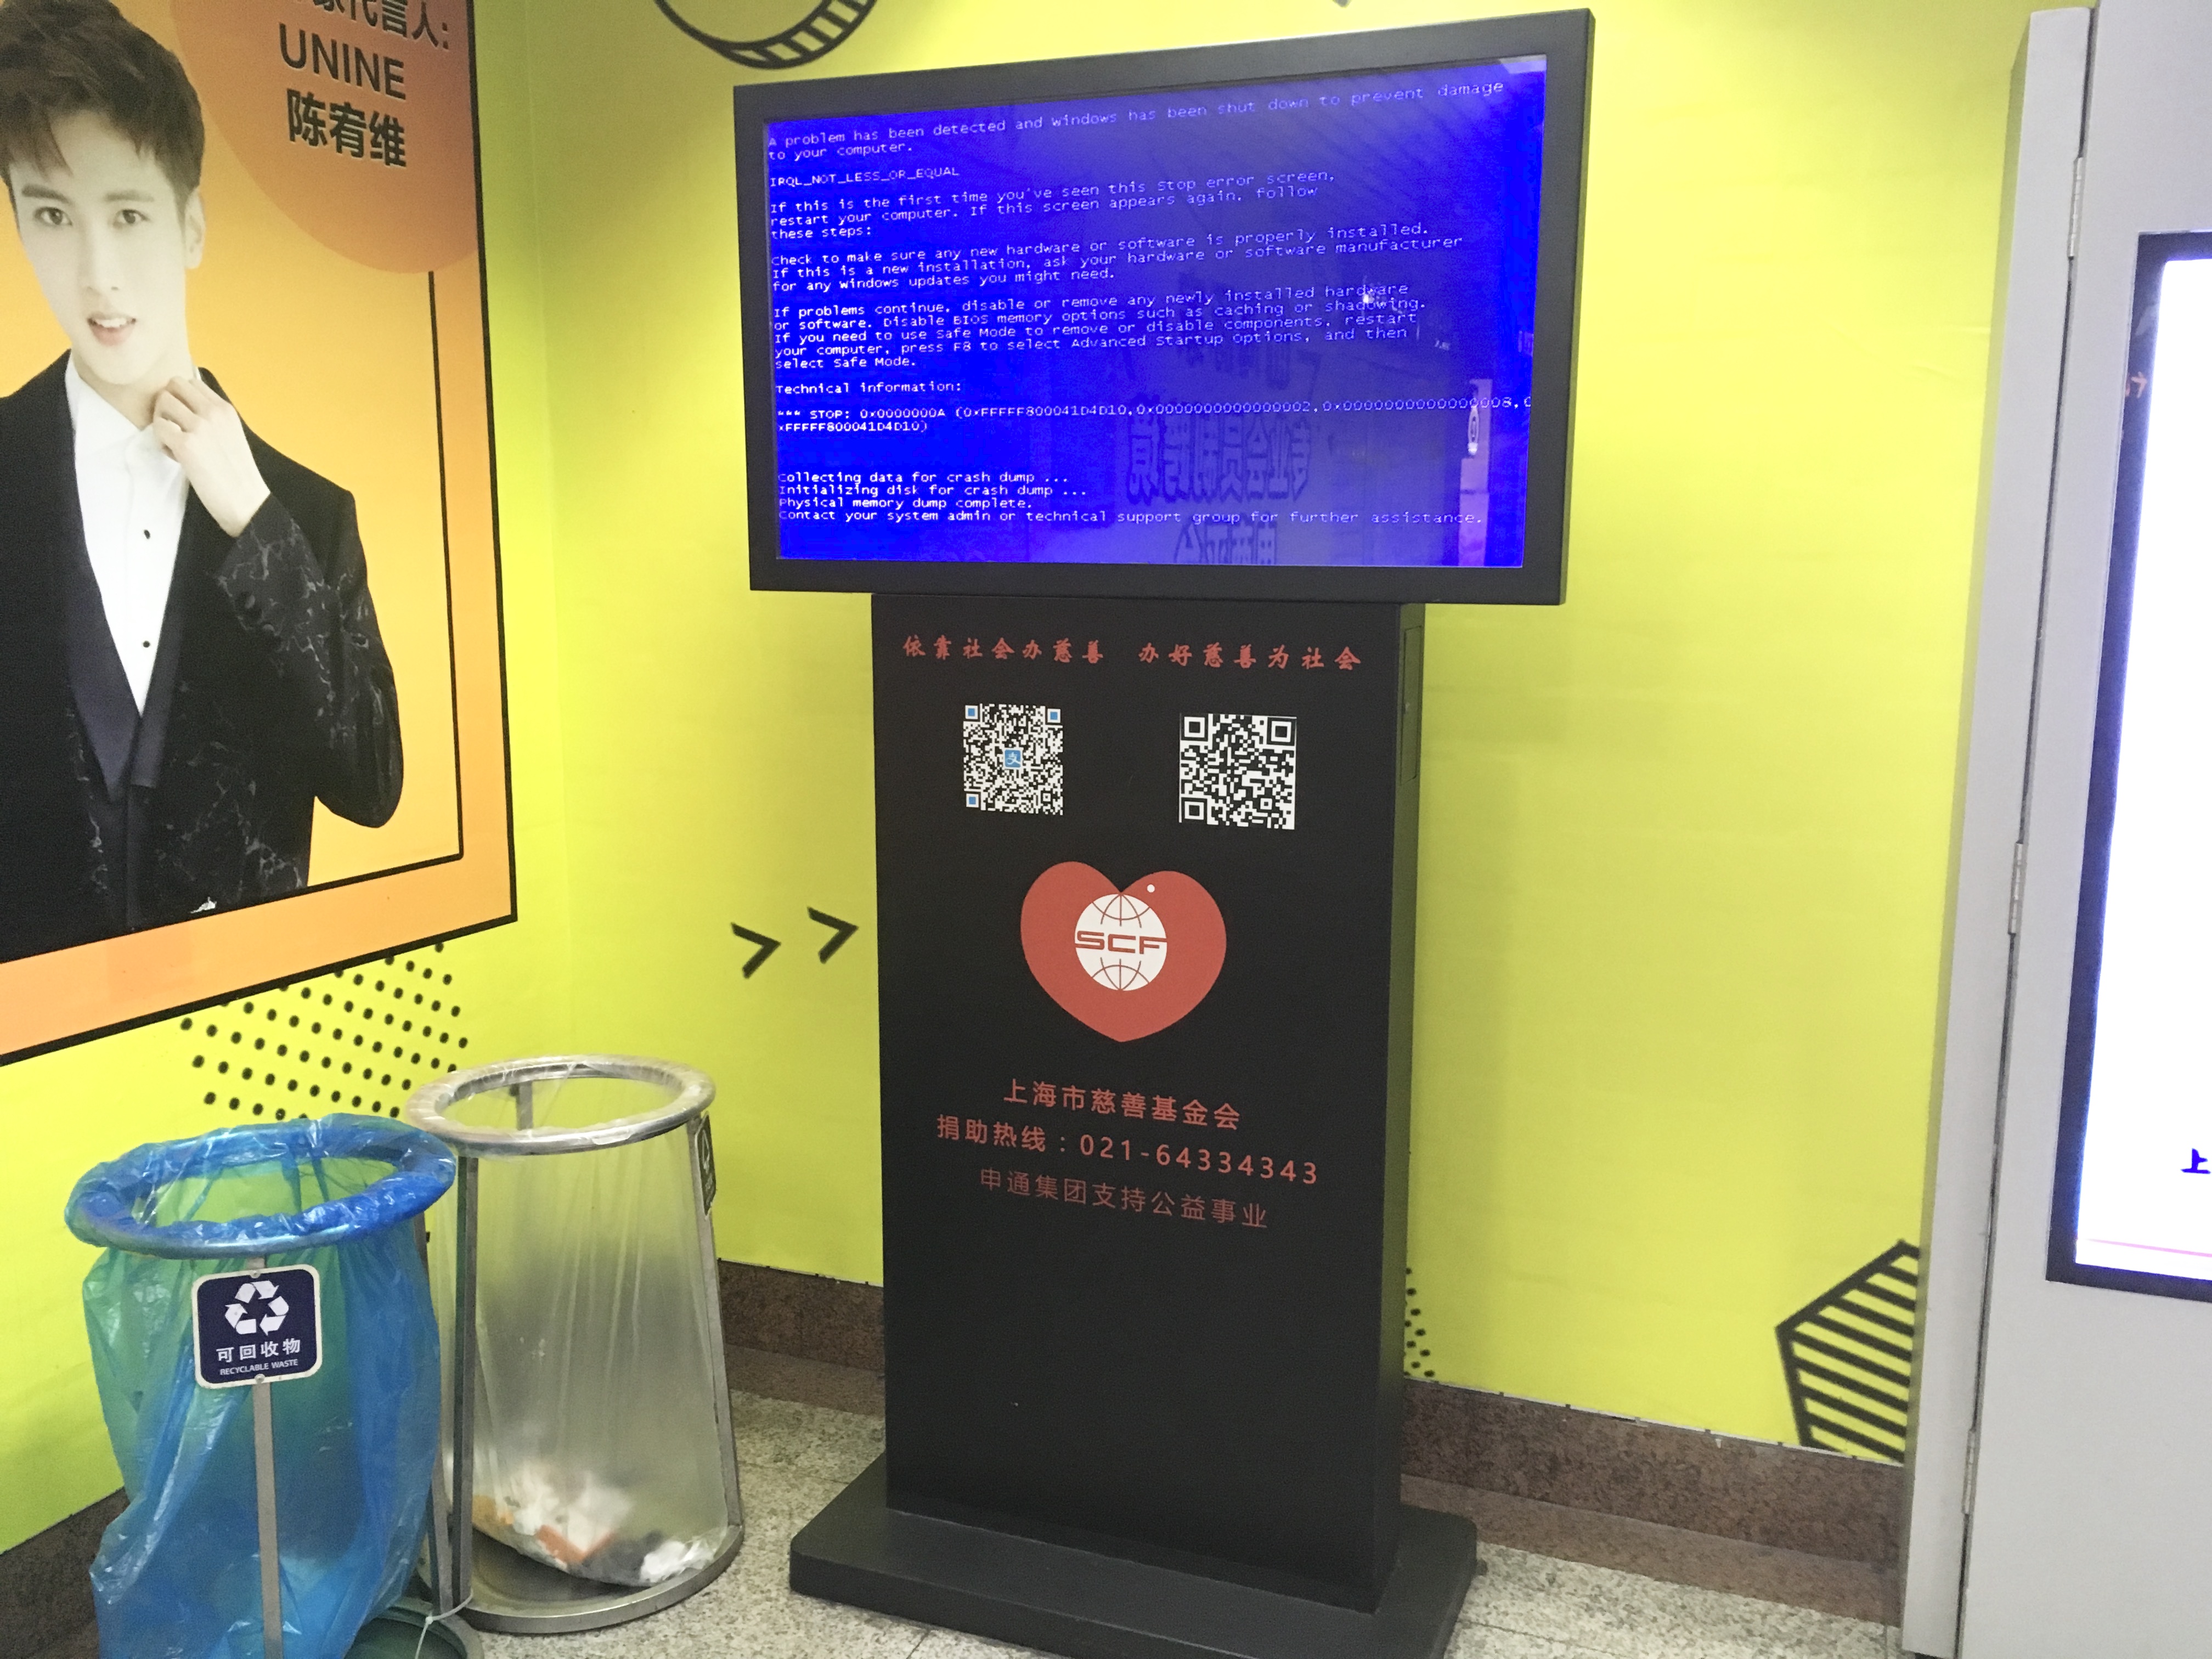 Display Errors are common in Public Places